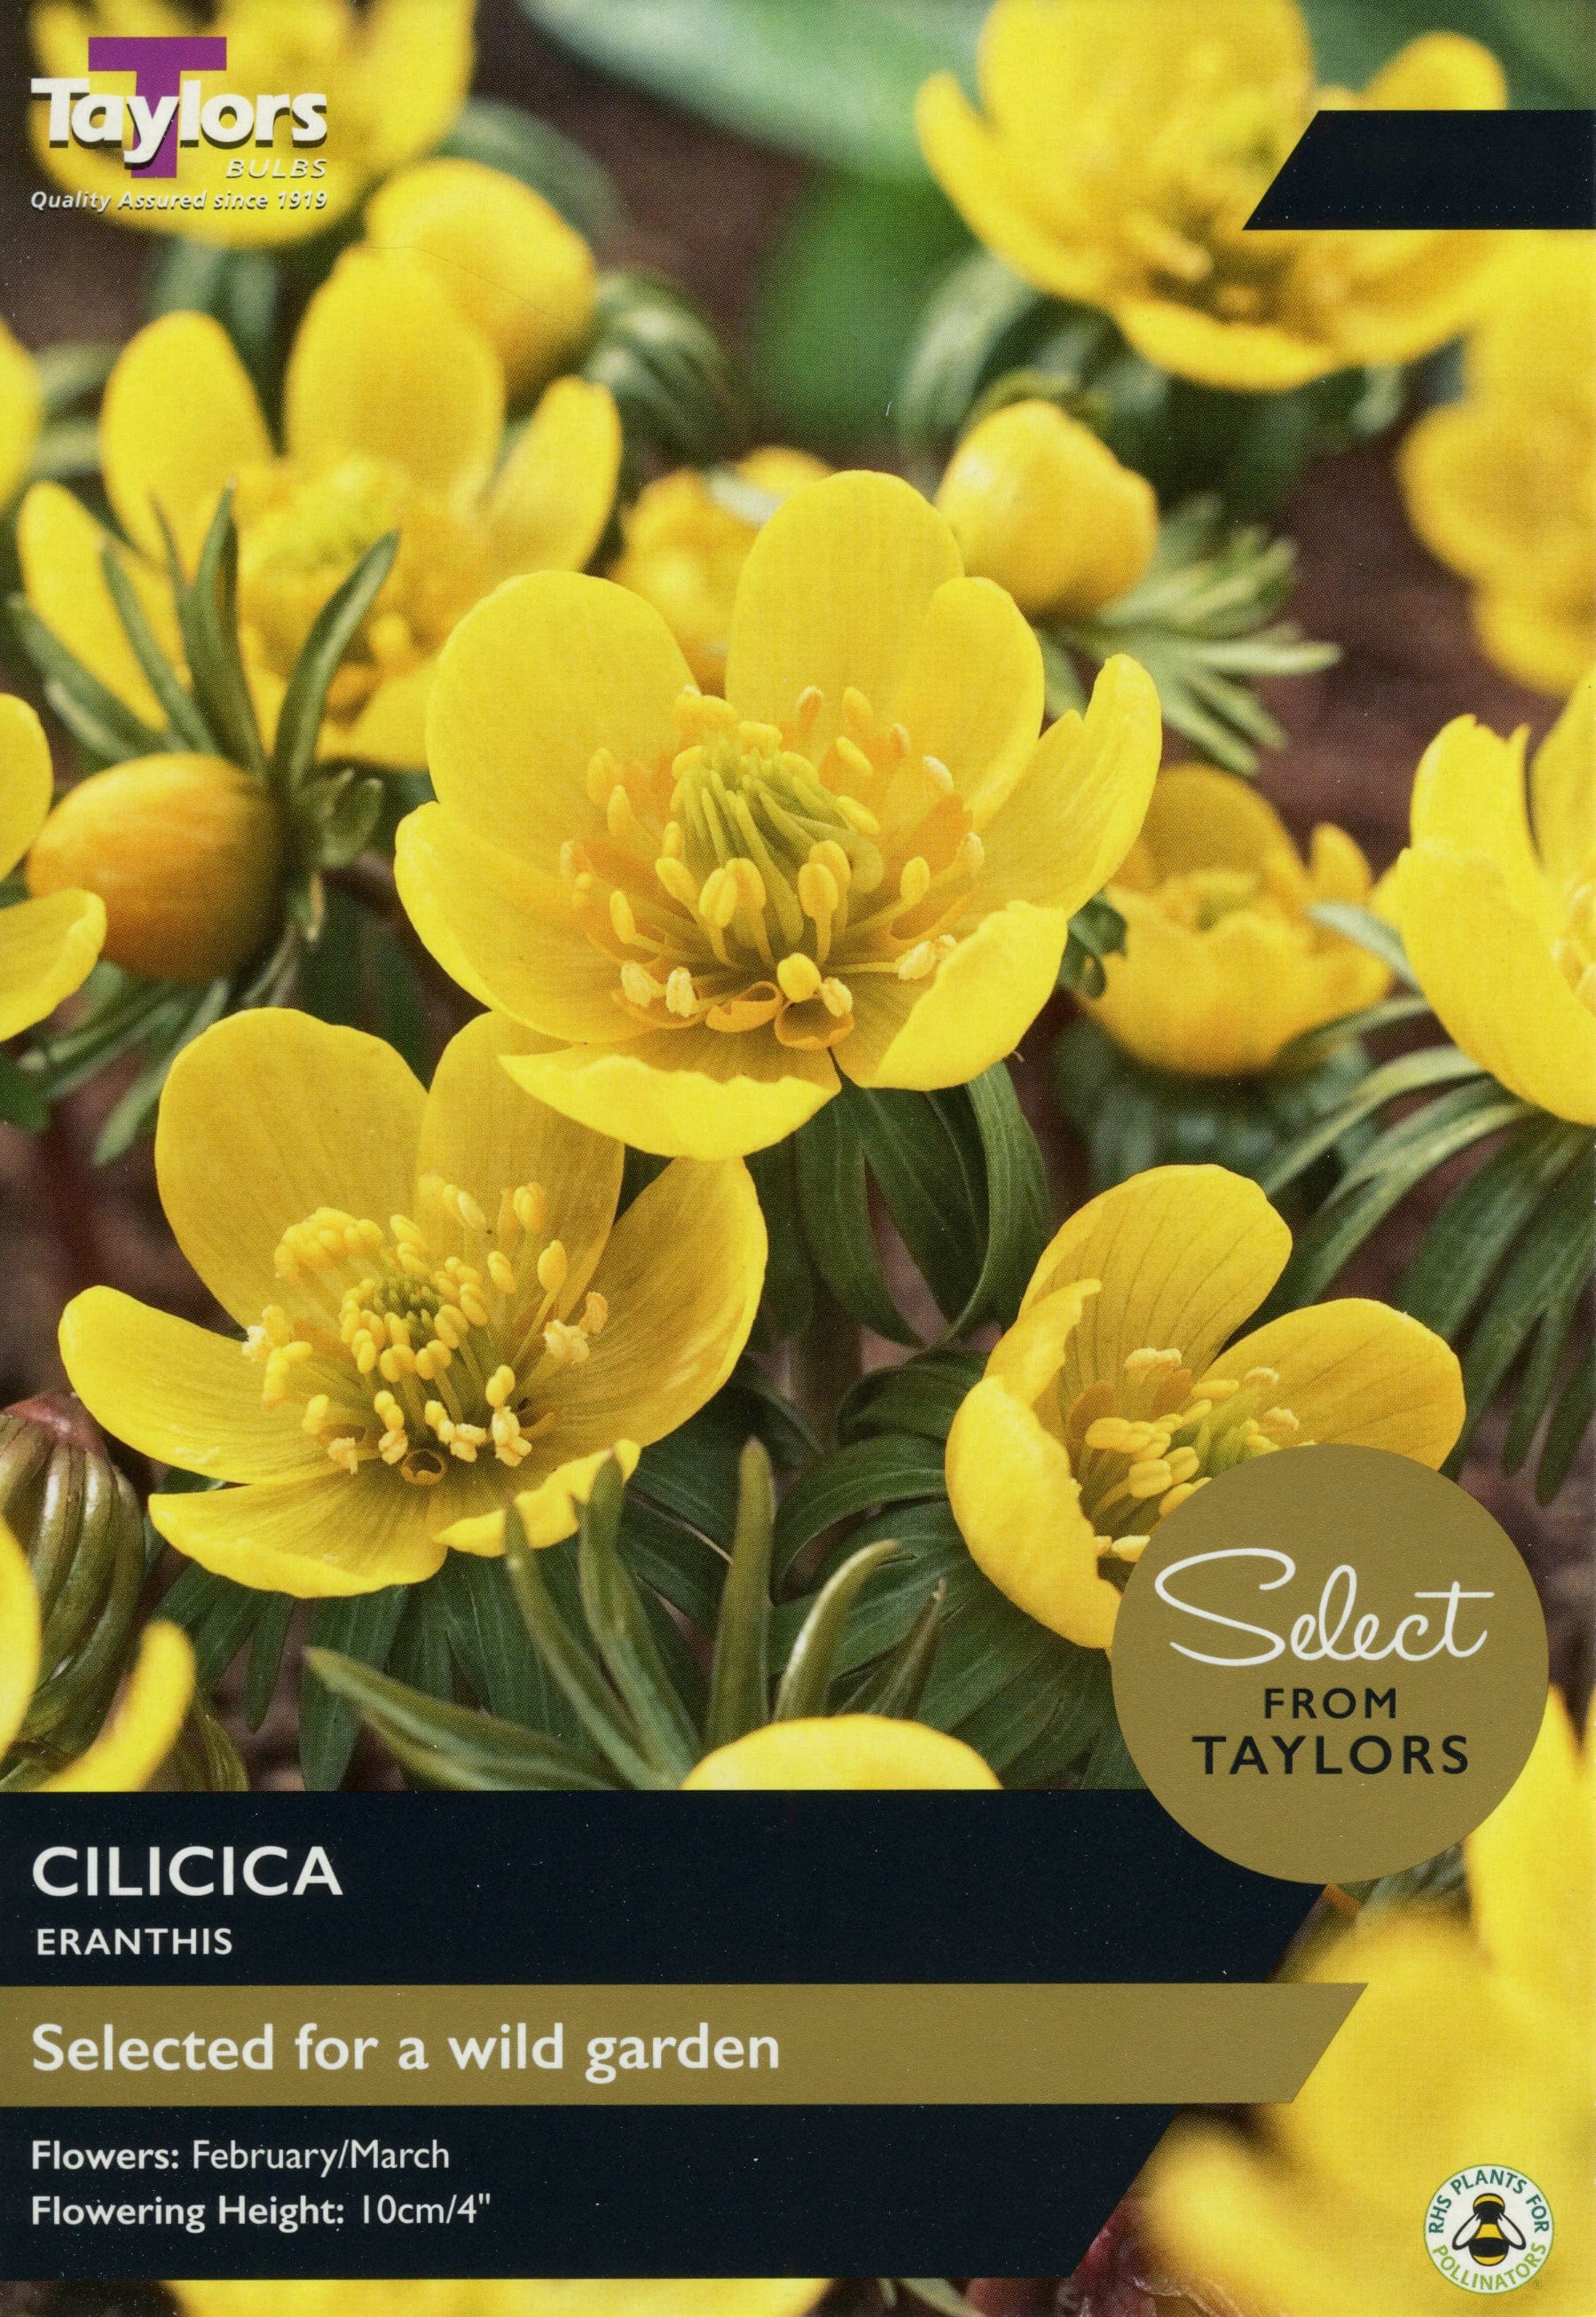 Taylors Taylors Eranthis Taylors Bulbs Eranthis Cilicia 6 Pack